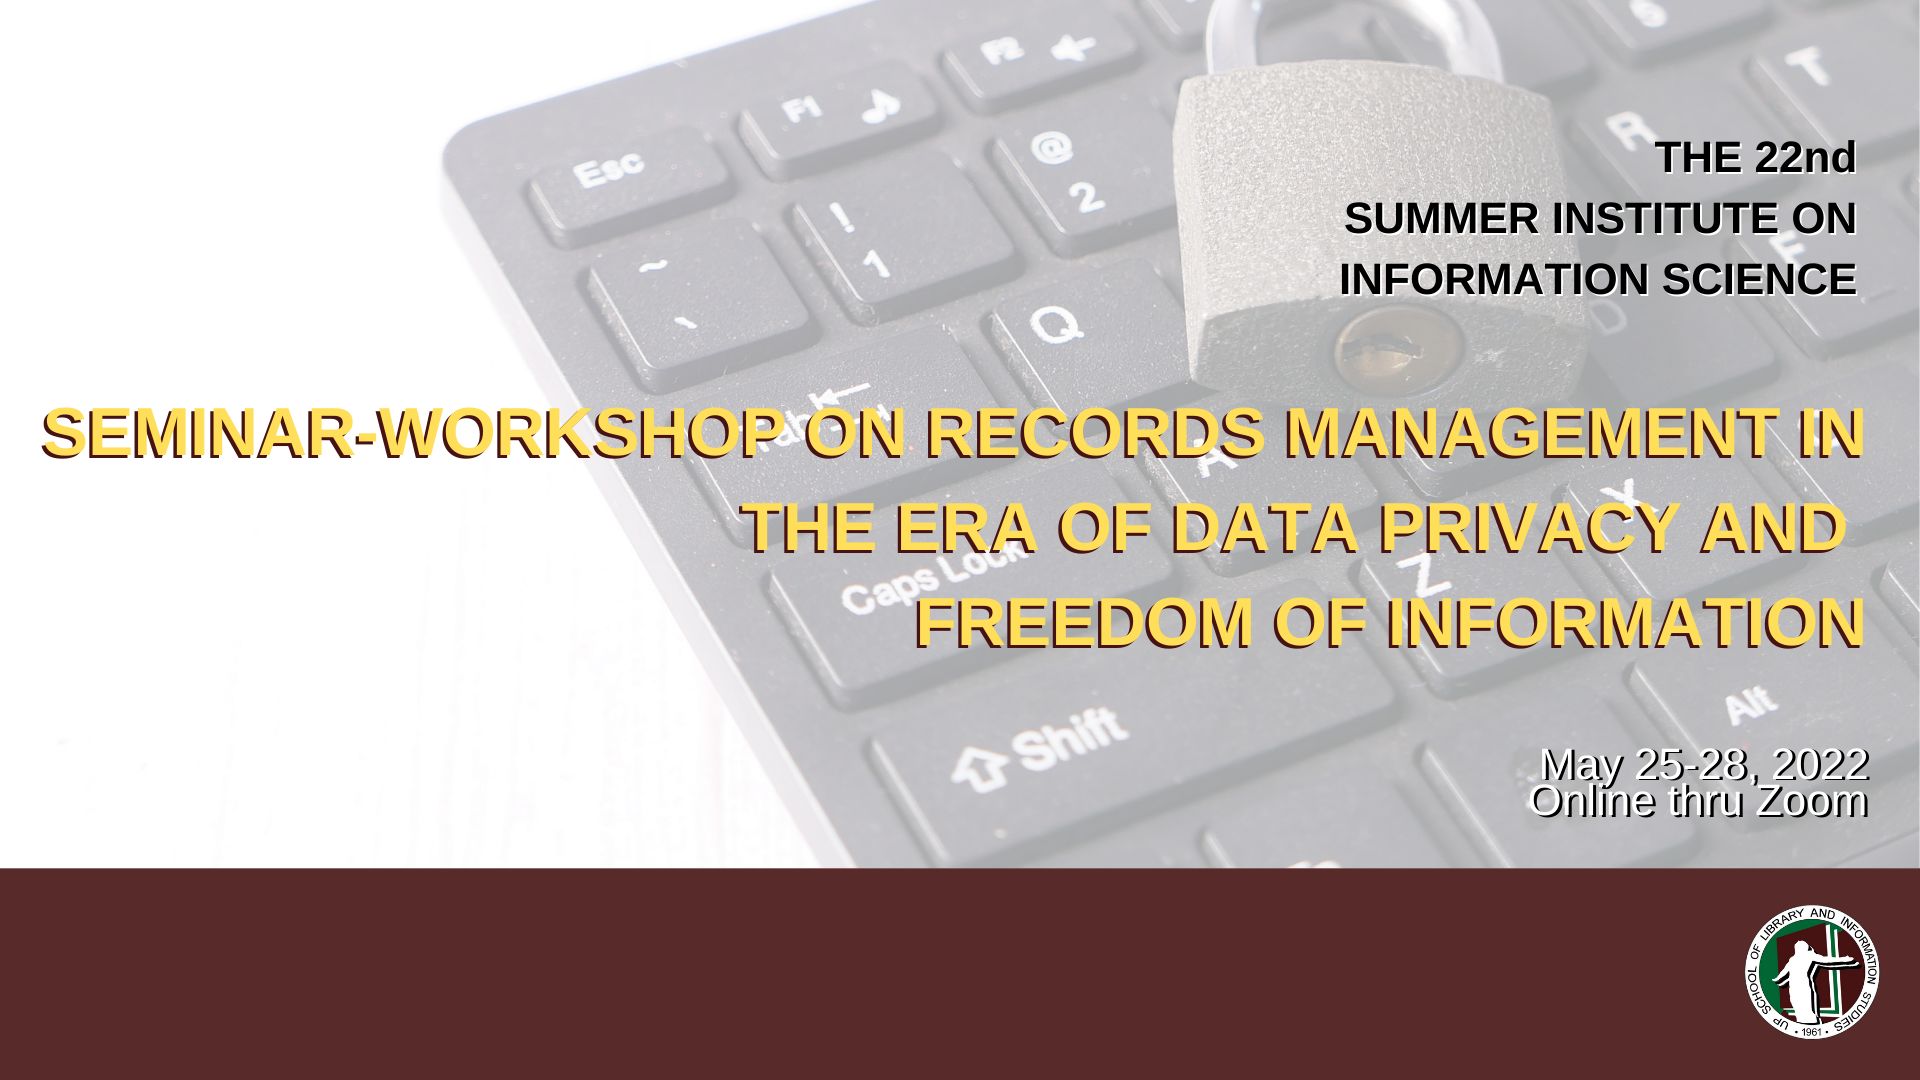 22nd Summer Institute on Information Science